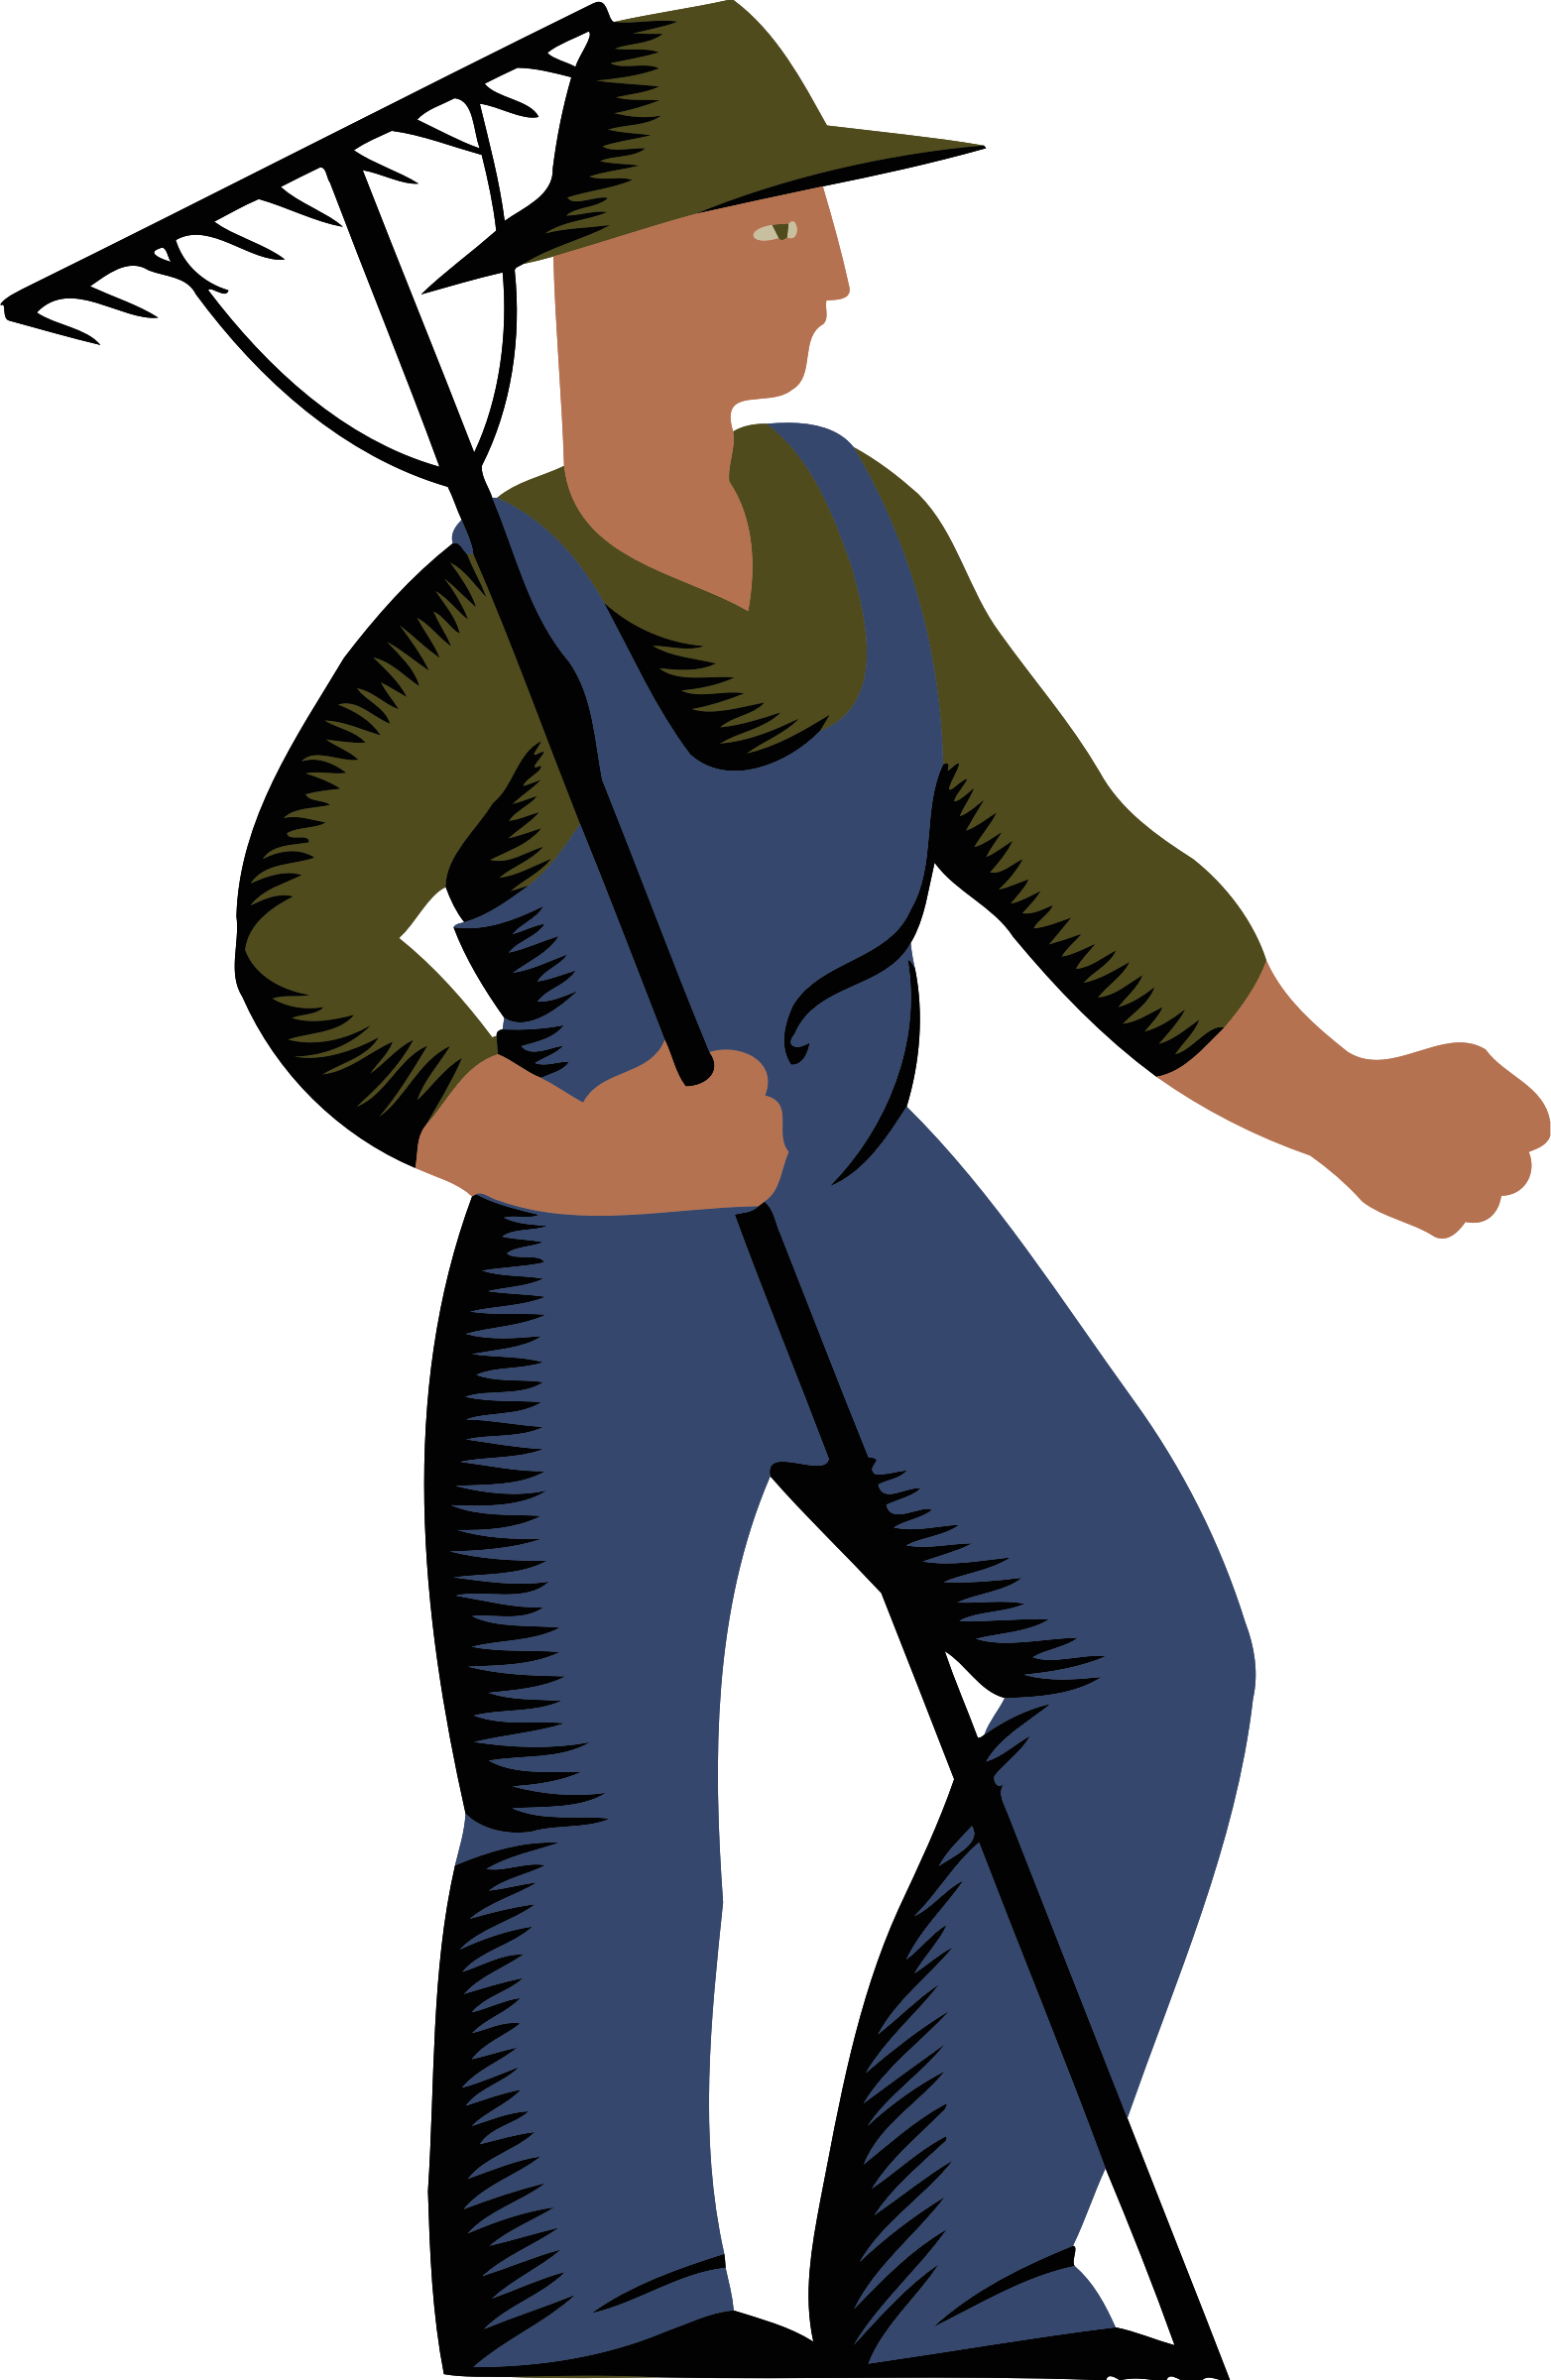 Farmer clipart labour. Worker big image png